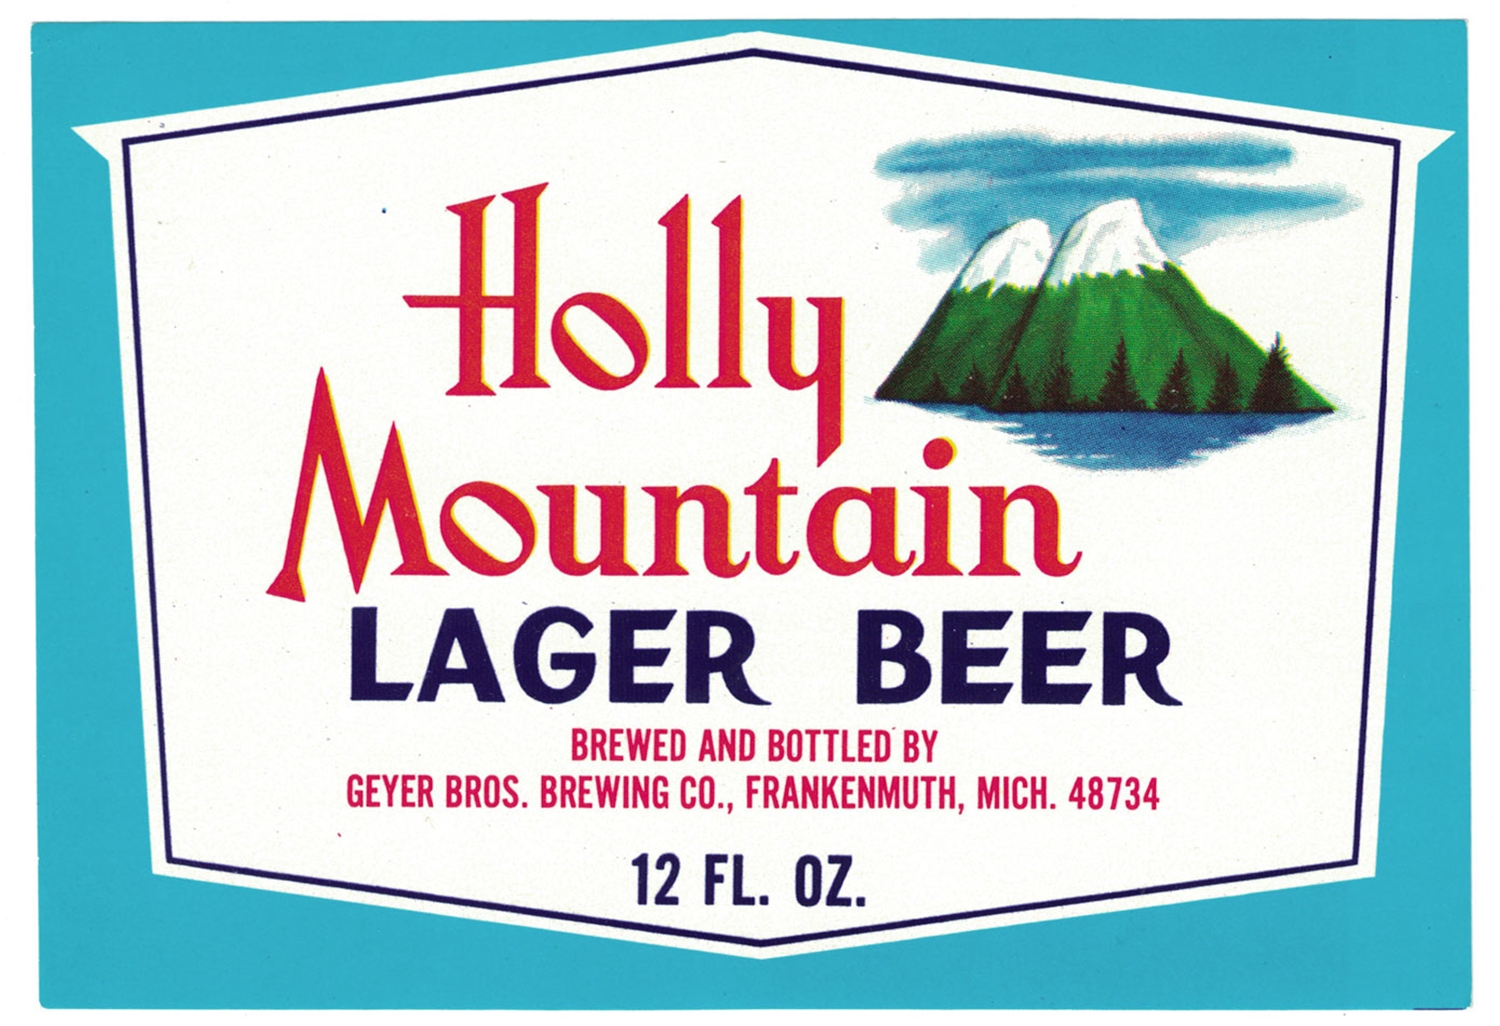 Holly Mountain Lager Beer